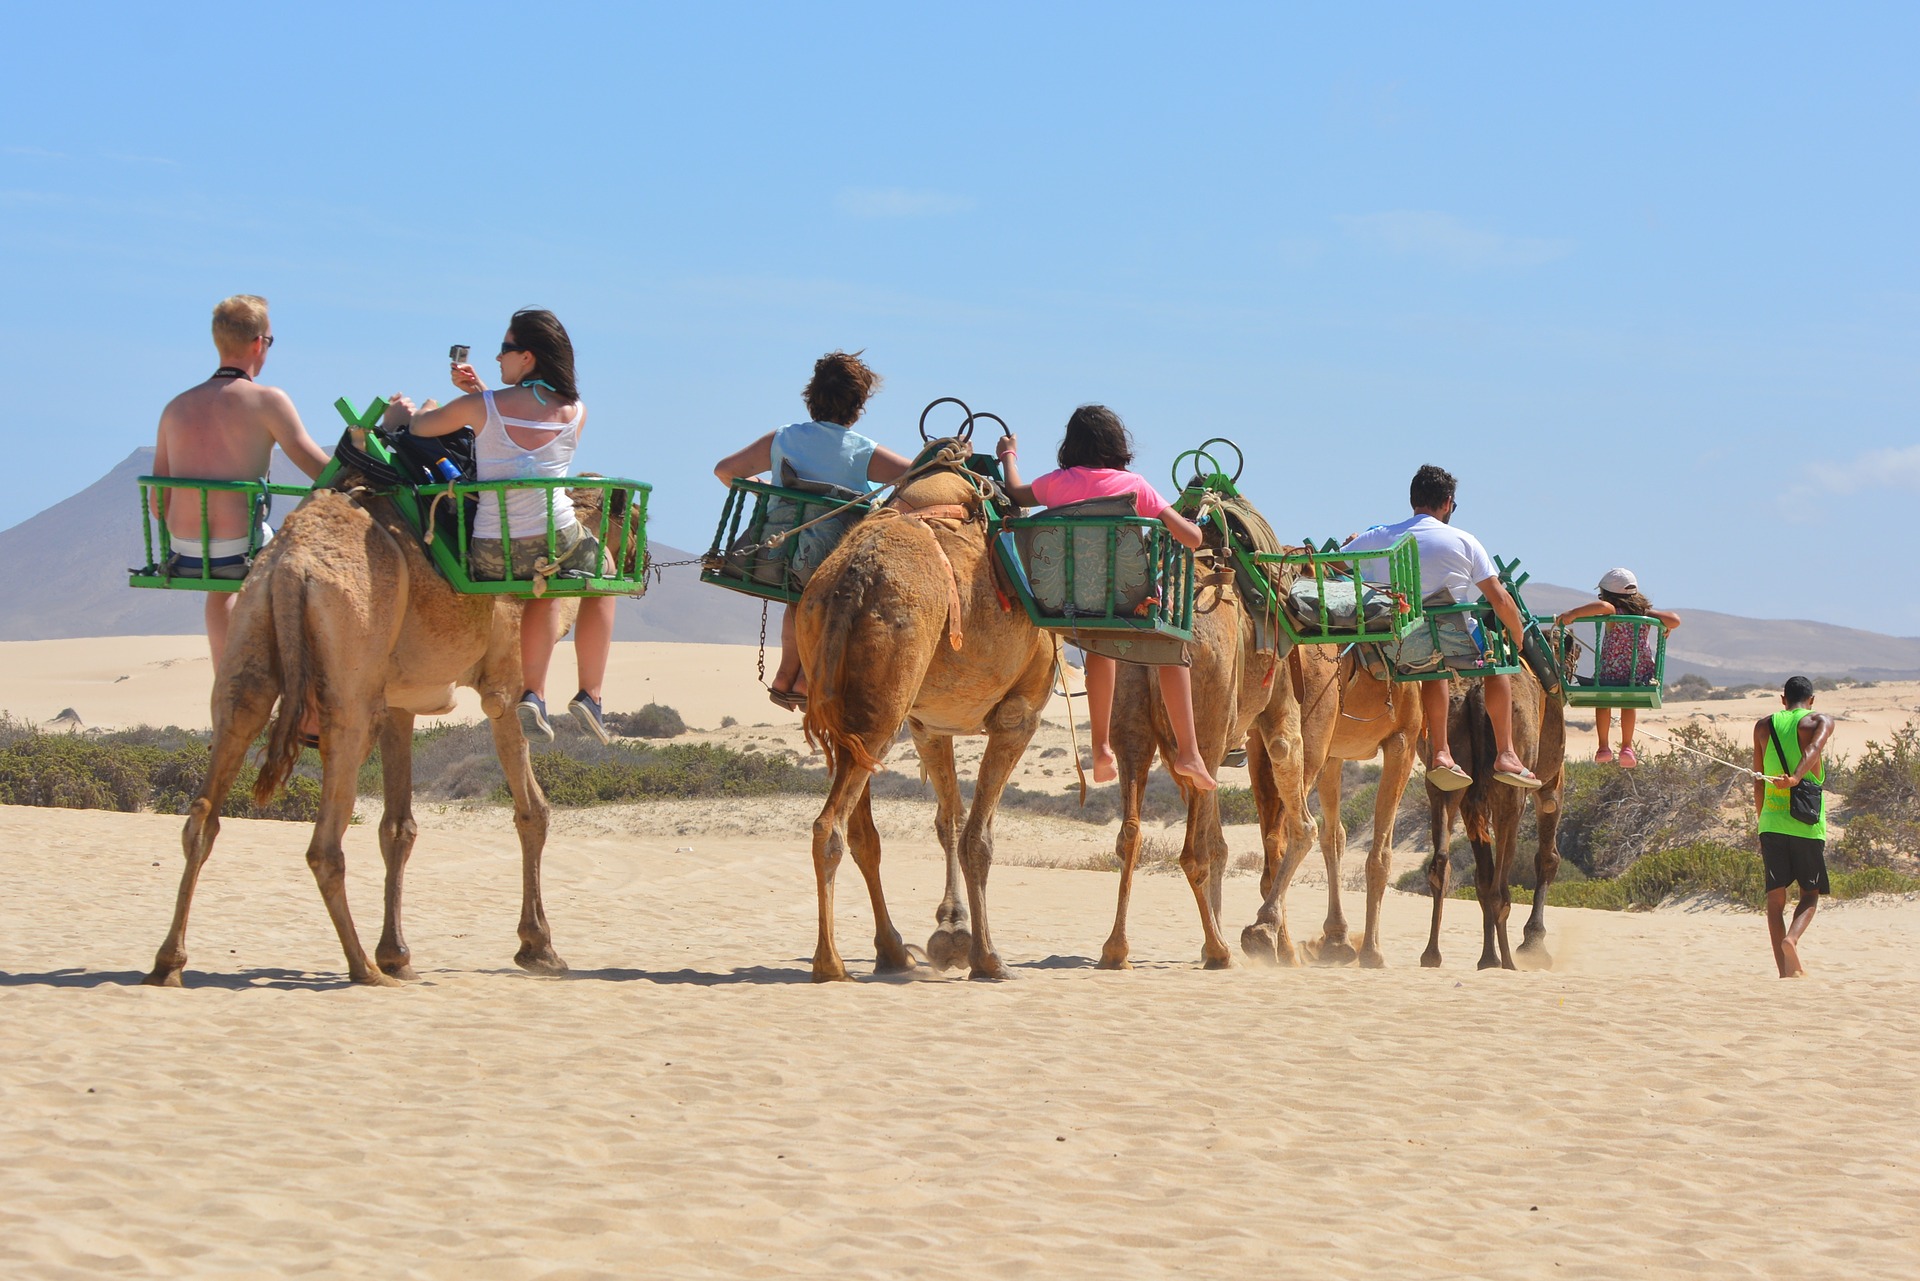 This camel tour is an example of extreme use of these animals.